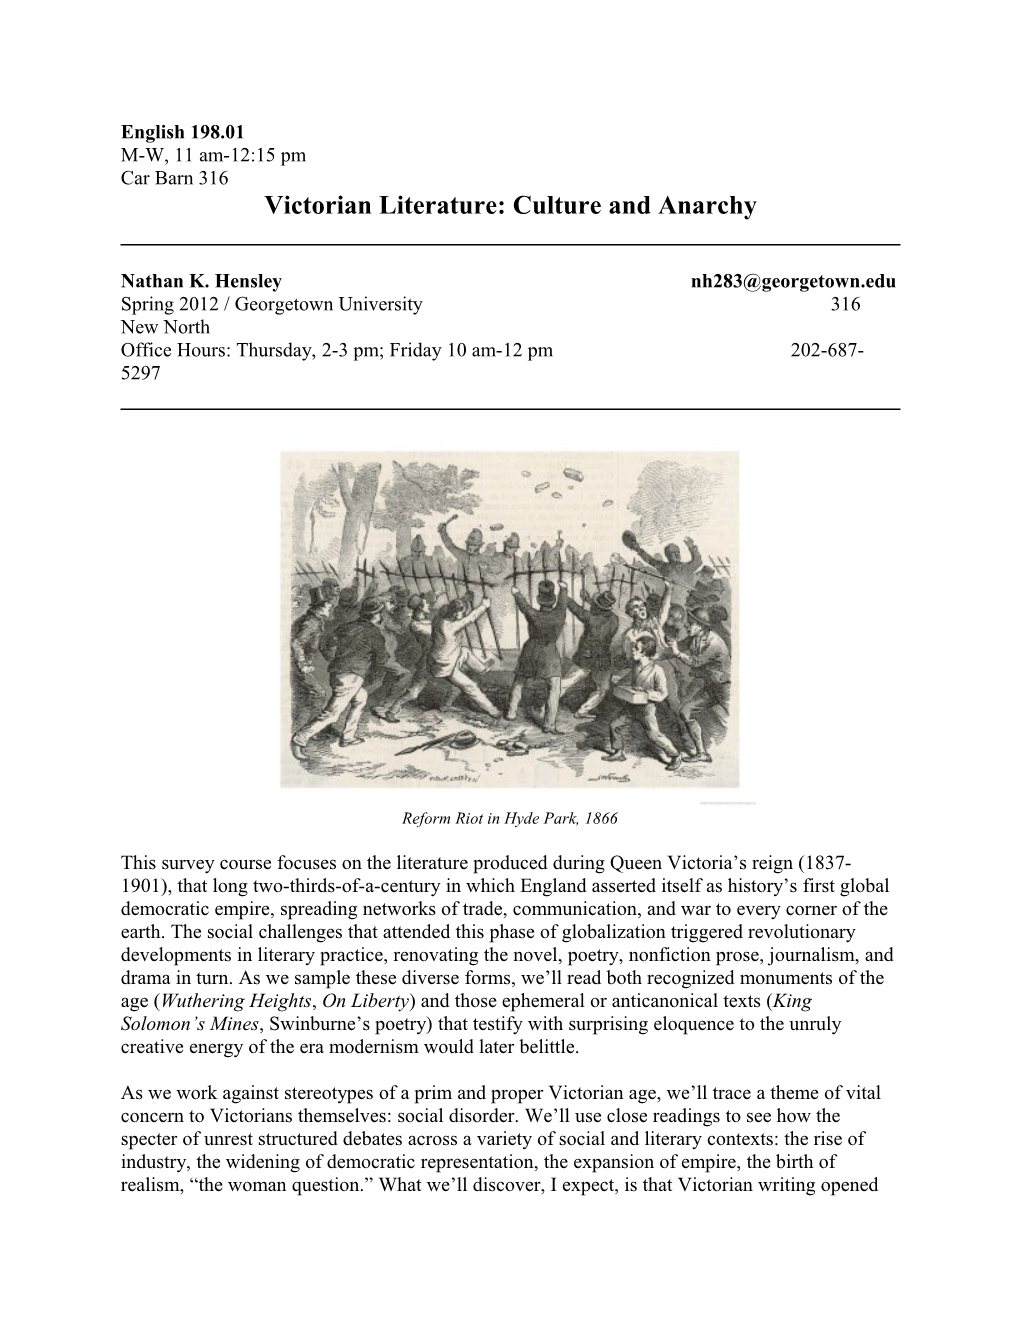 Victorian Literature: Culture and Anarchy